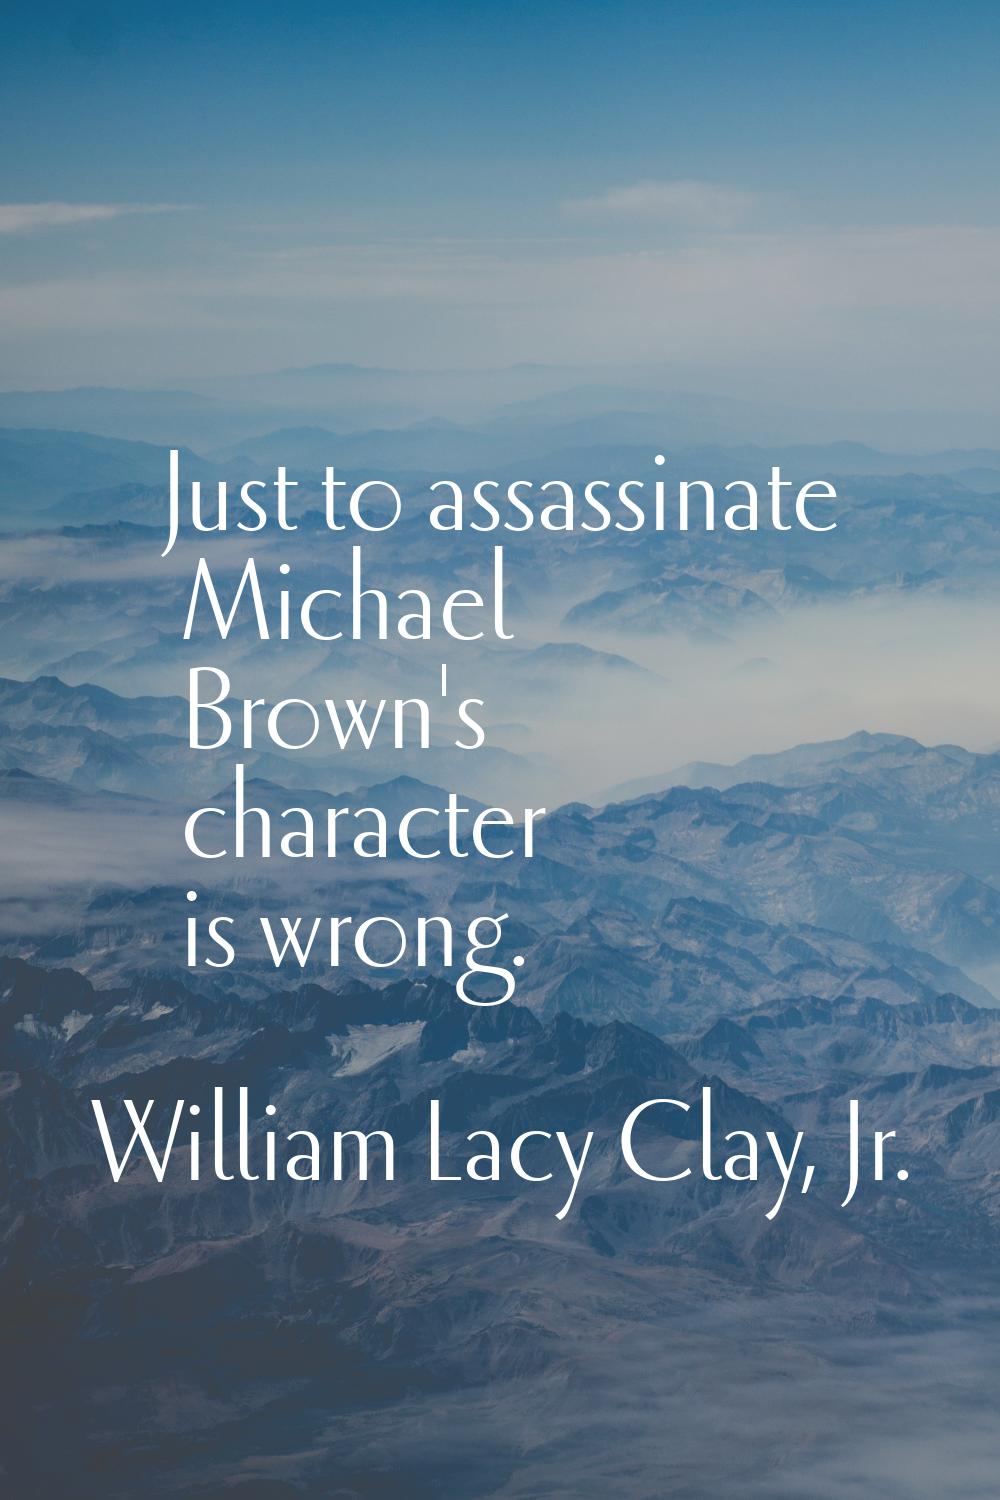 Just to assassinate Michael Brown's character is wrong.